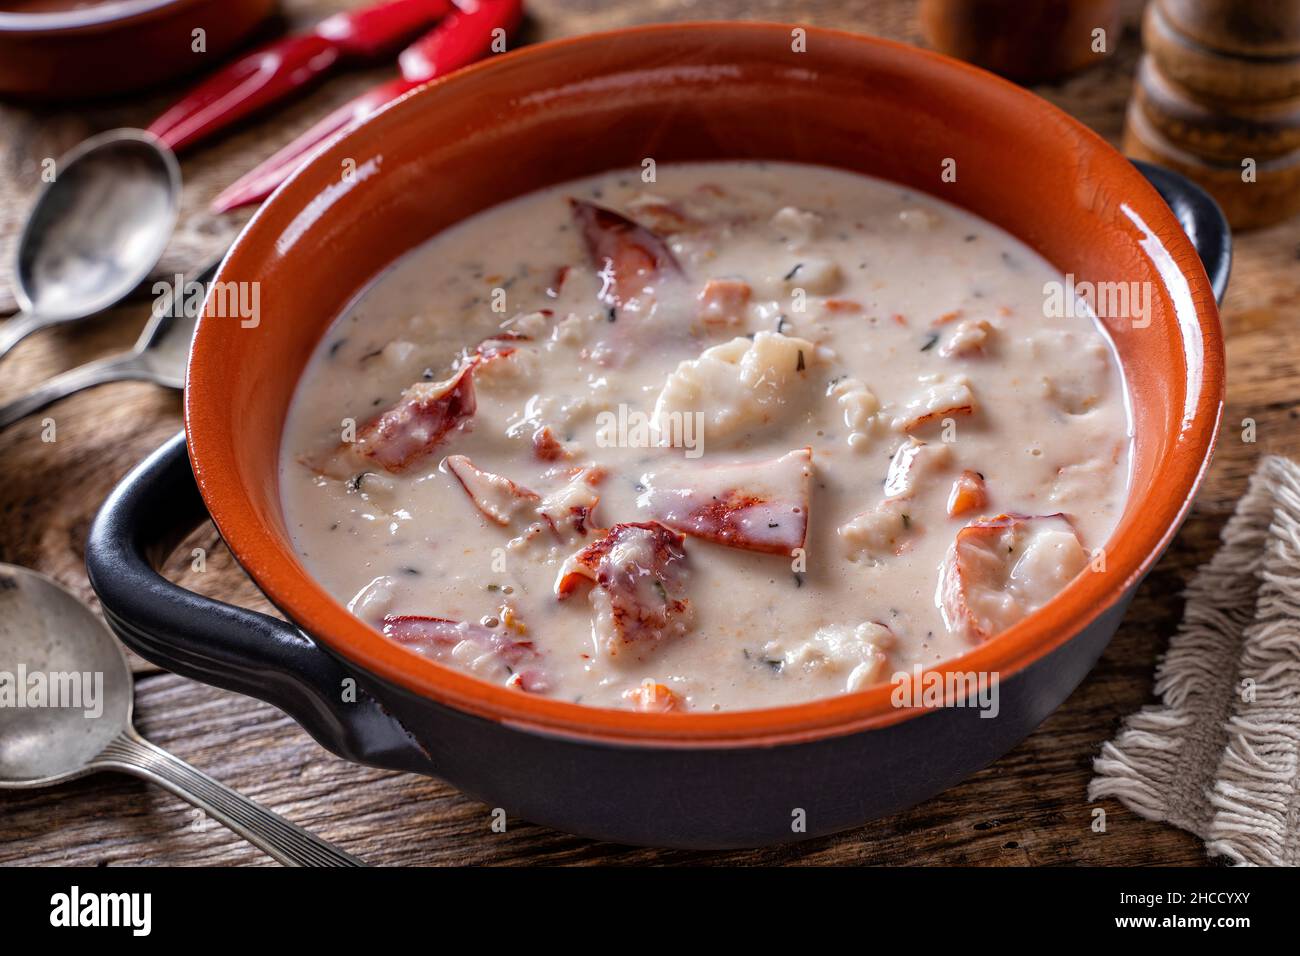 A bowl of hearty delicious lobster chowder. Stock Photo